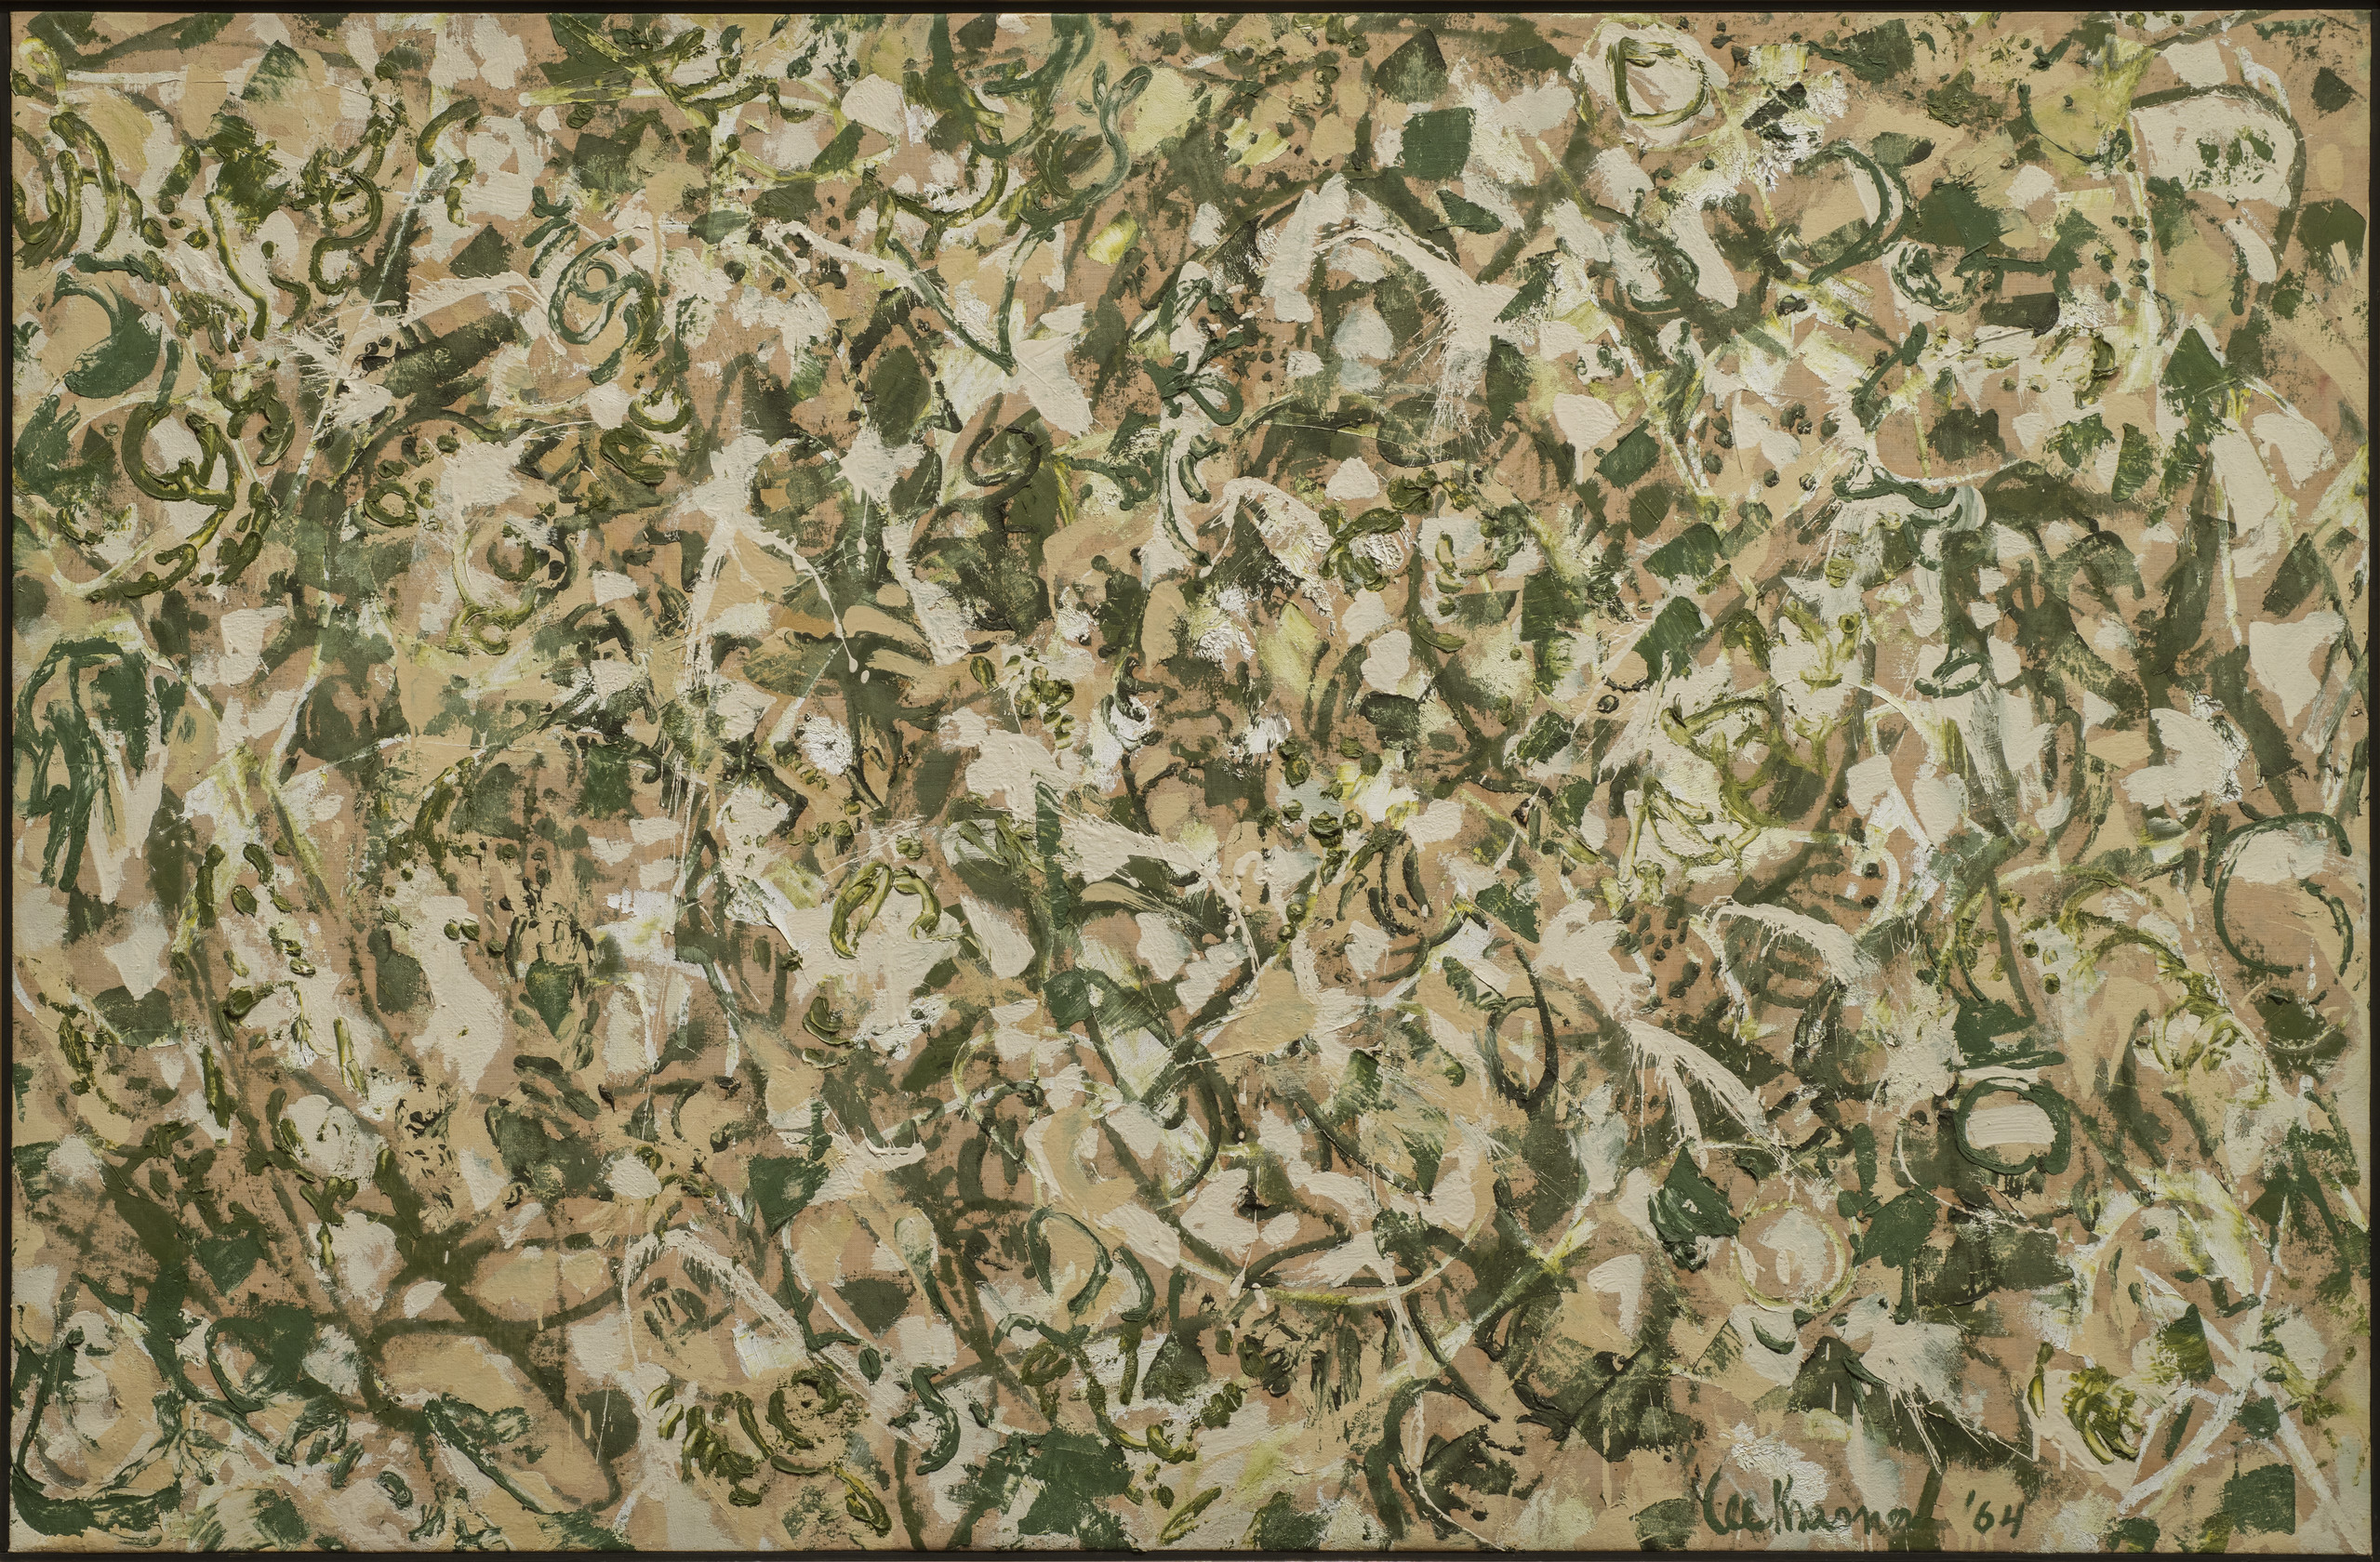 Densely layered, expressive brushwork in cream, white, and multiple shades of green cover a rectangular, horizontal canvas from edge to edge. Daubs and splashes of paint mingle with strokes resembling arcs, circles, ovals, and other curving forms to suggest movement and energy.